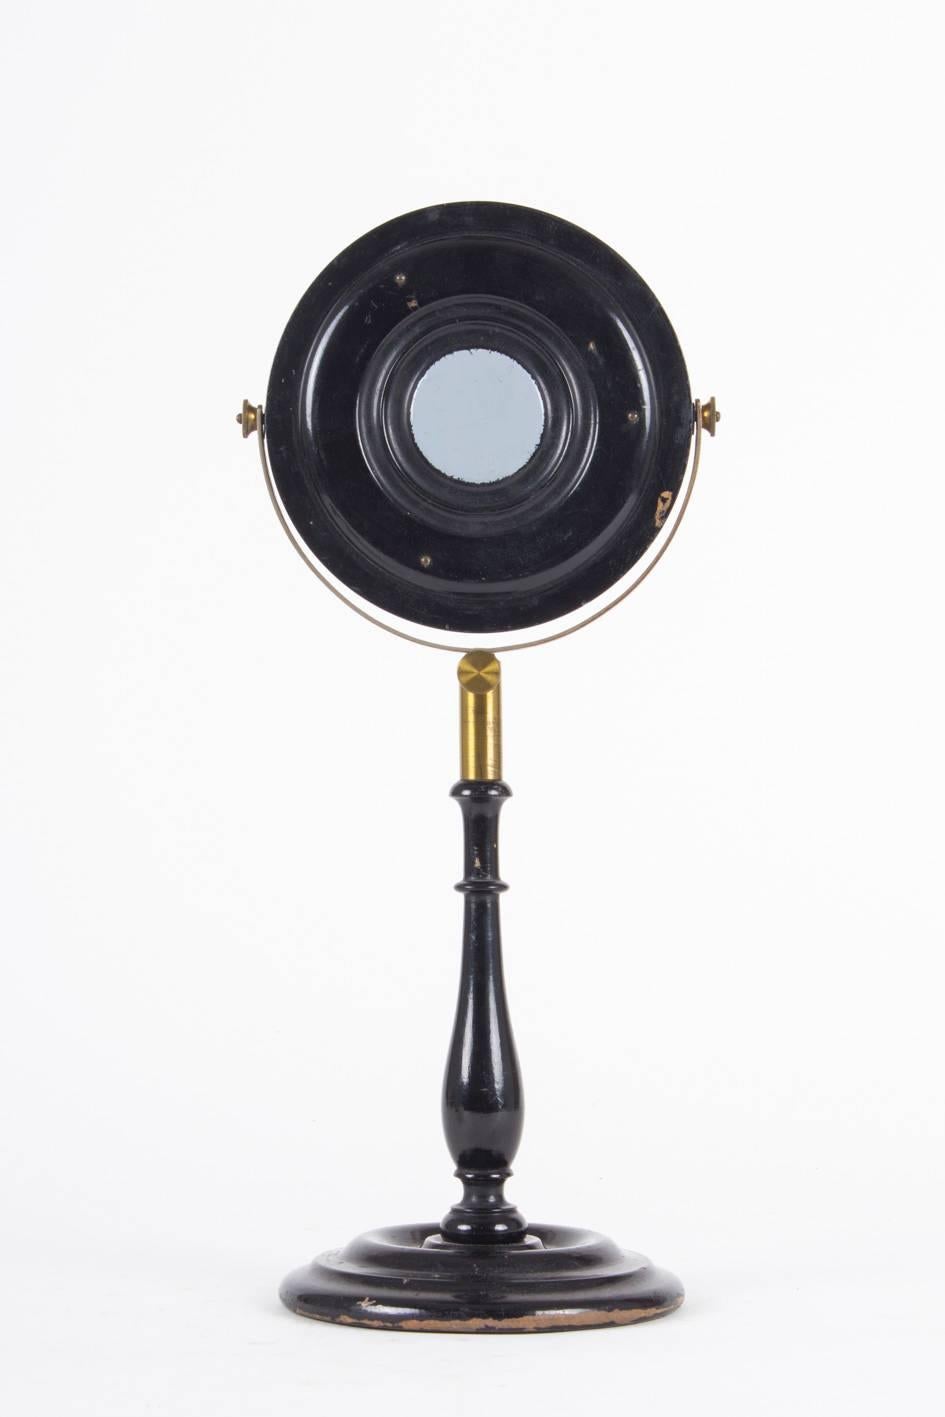 Mirrors like this were used for philosophical demonstration, mounted on ebonized wood stand with lacquered brass attachments.